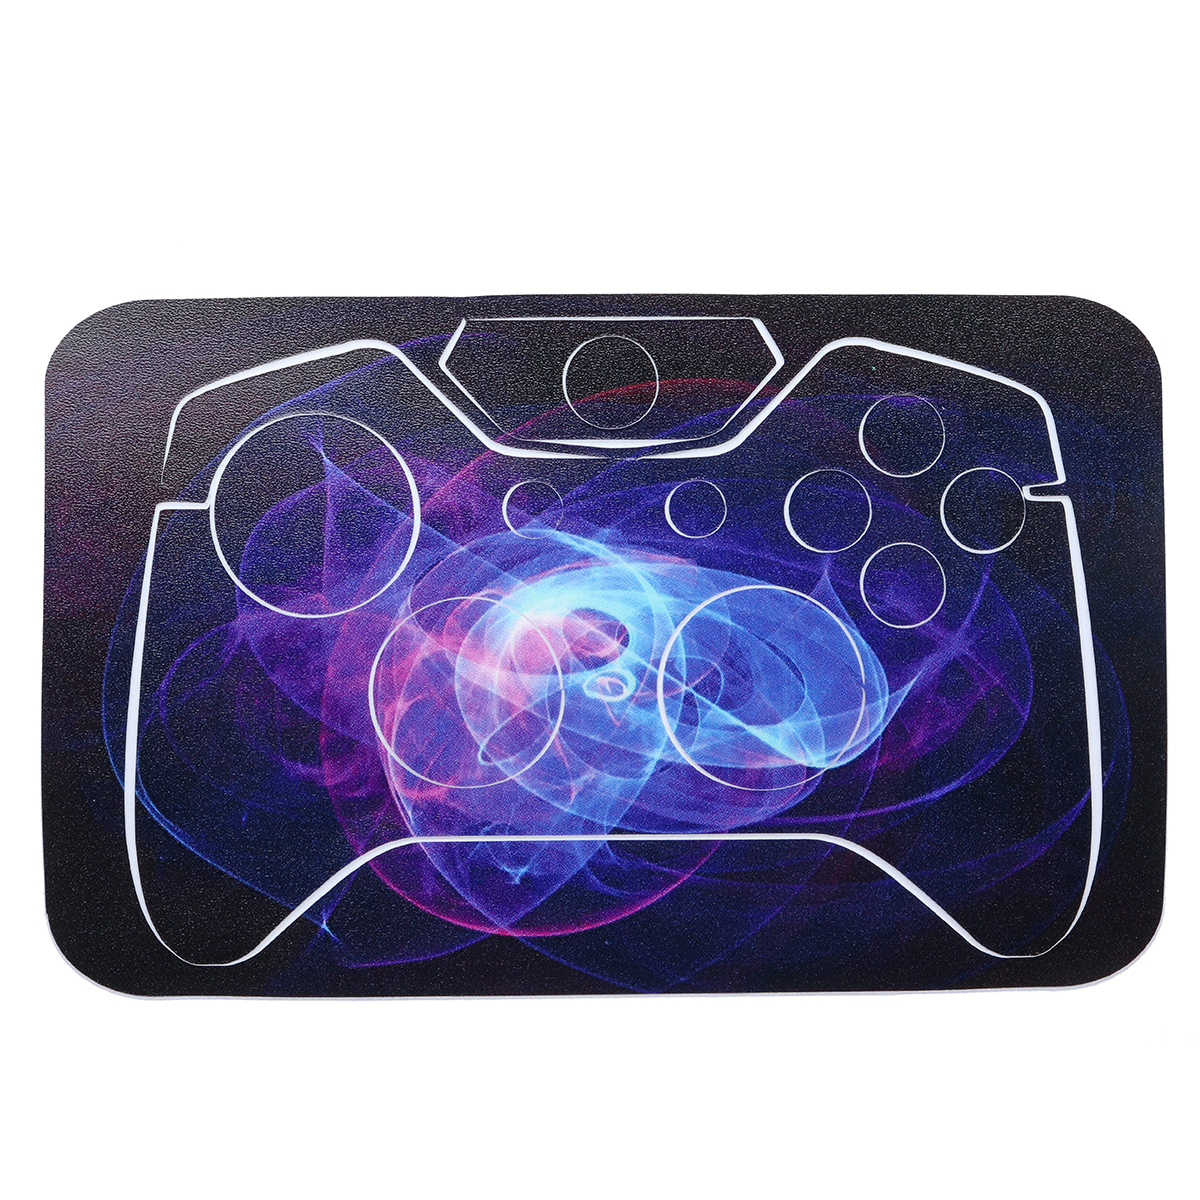 Purple Protective Vinyl Decal Skin Stickers Wrap Cover For Xbox One Game Console Game Controller Kinect 8